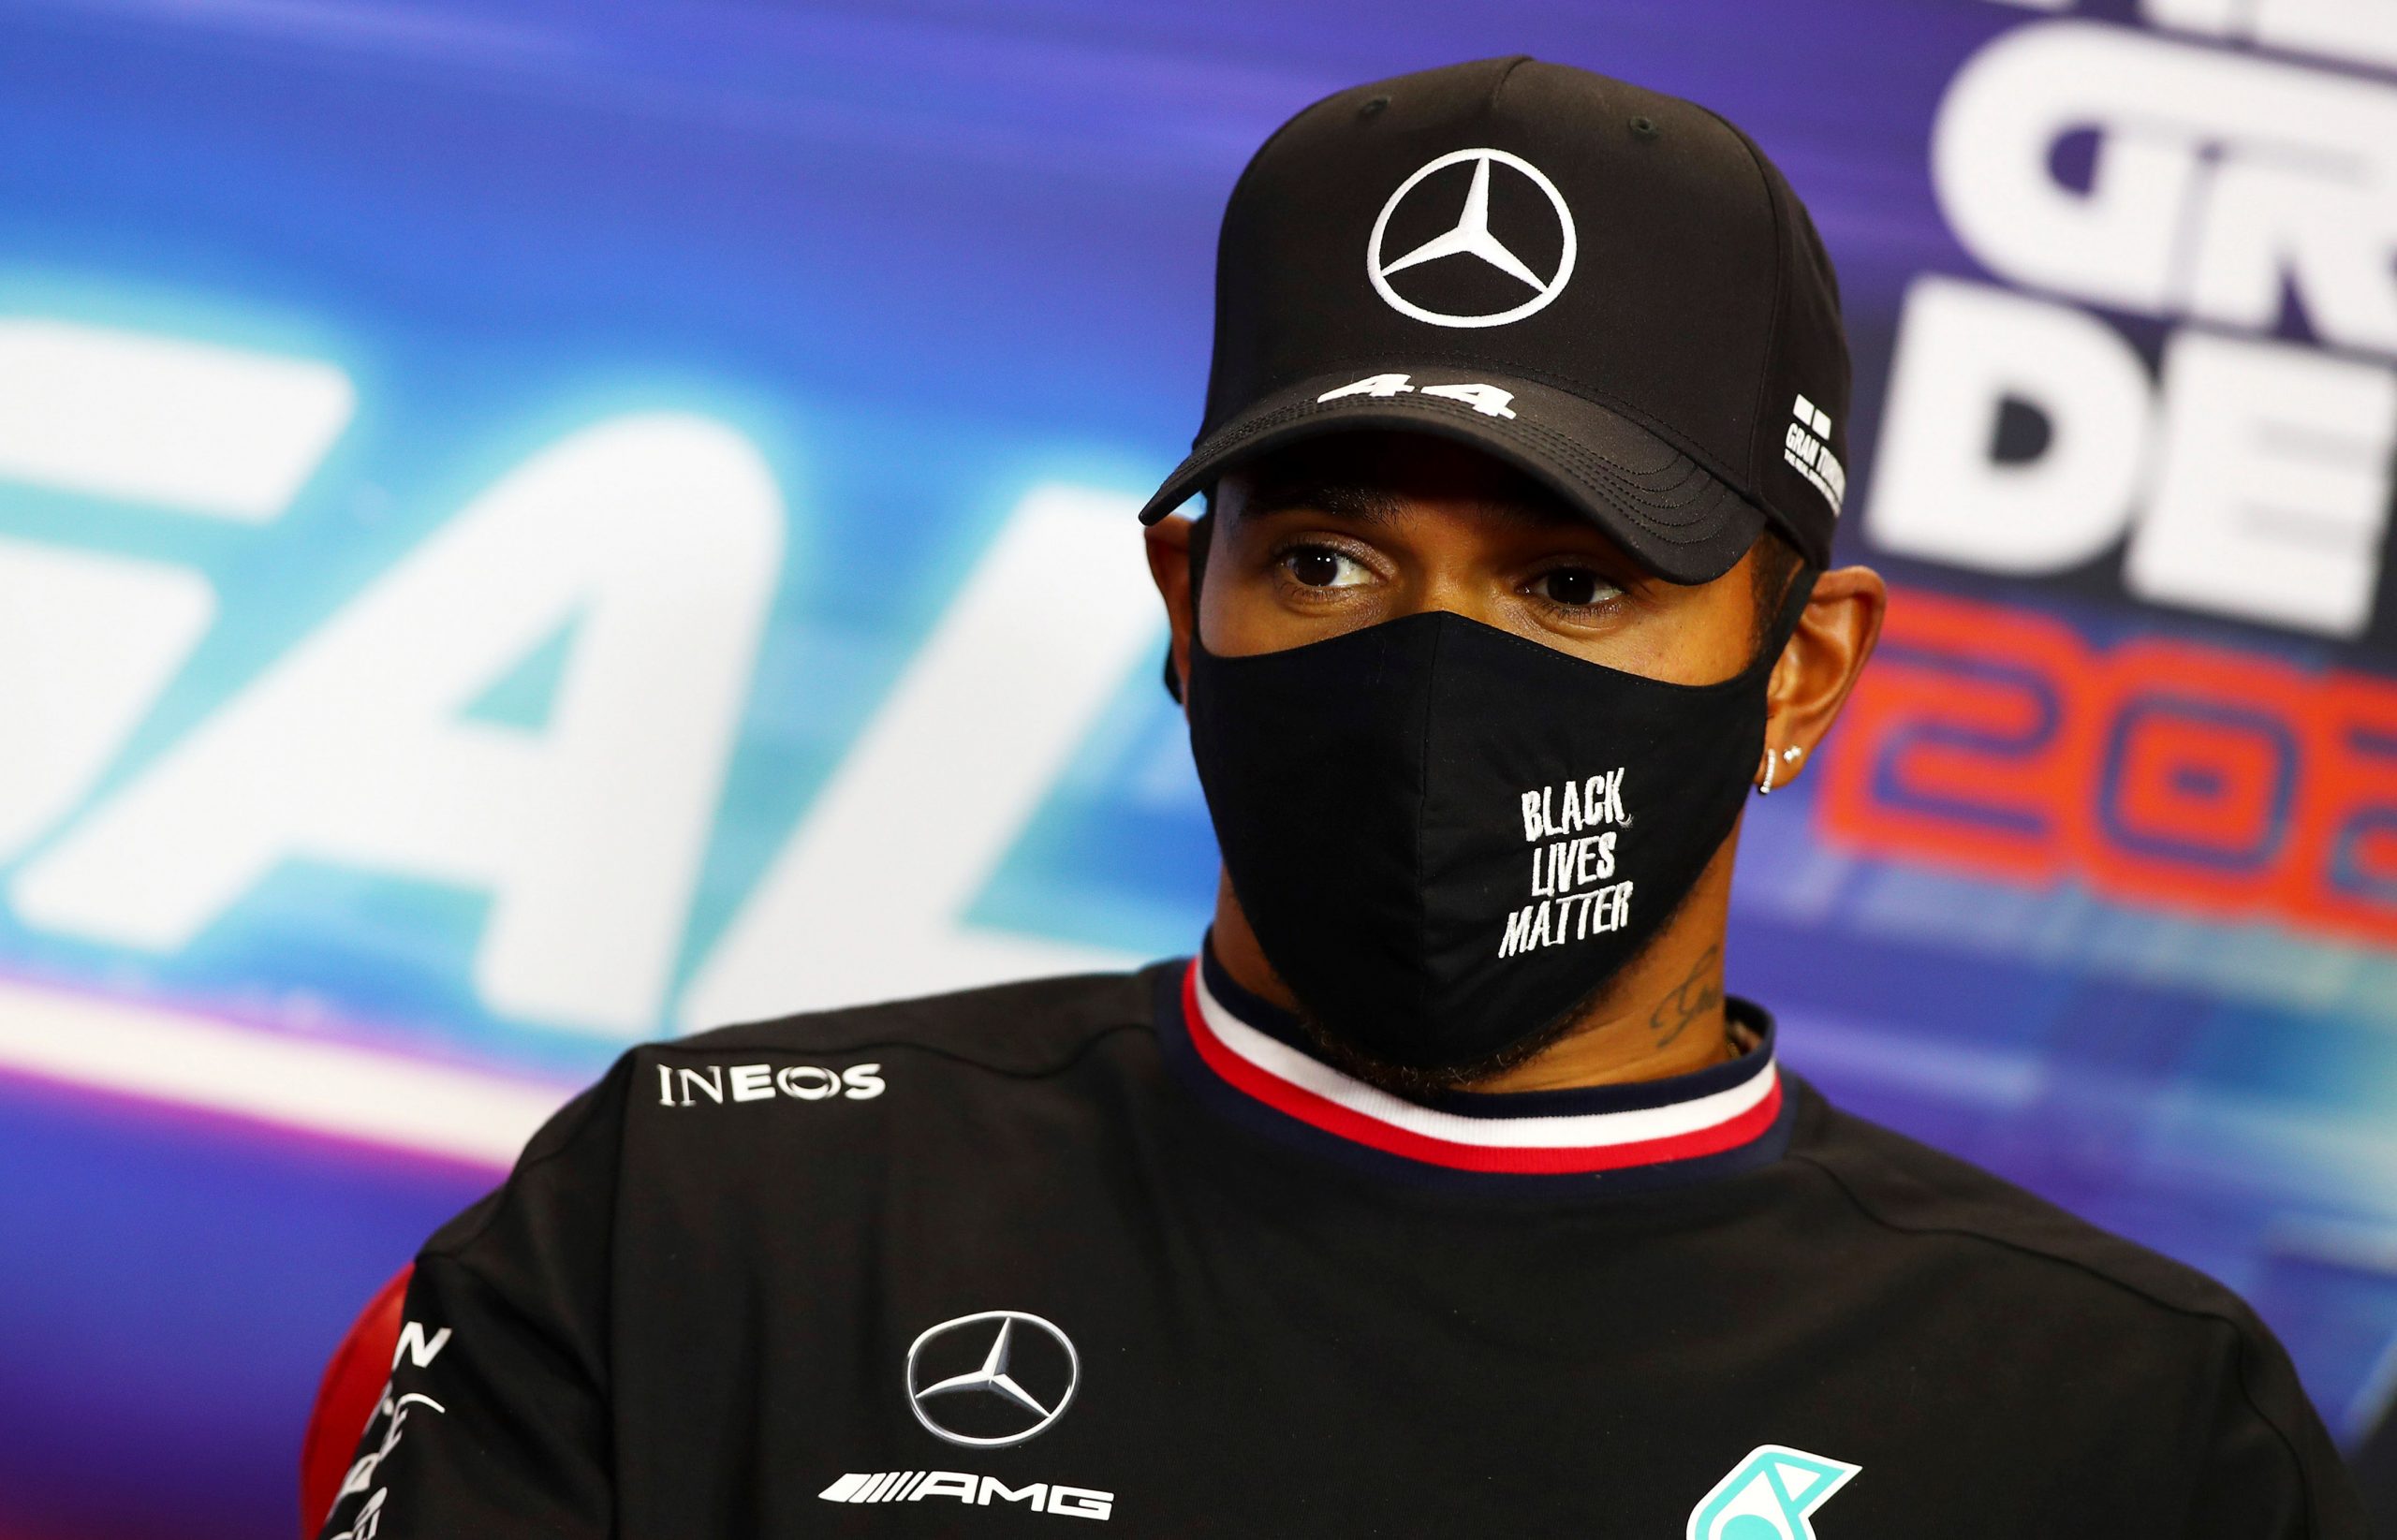 Lewis Hamilton set to sign contract extension with Mercedes